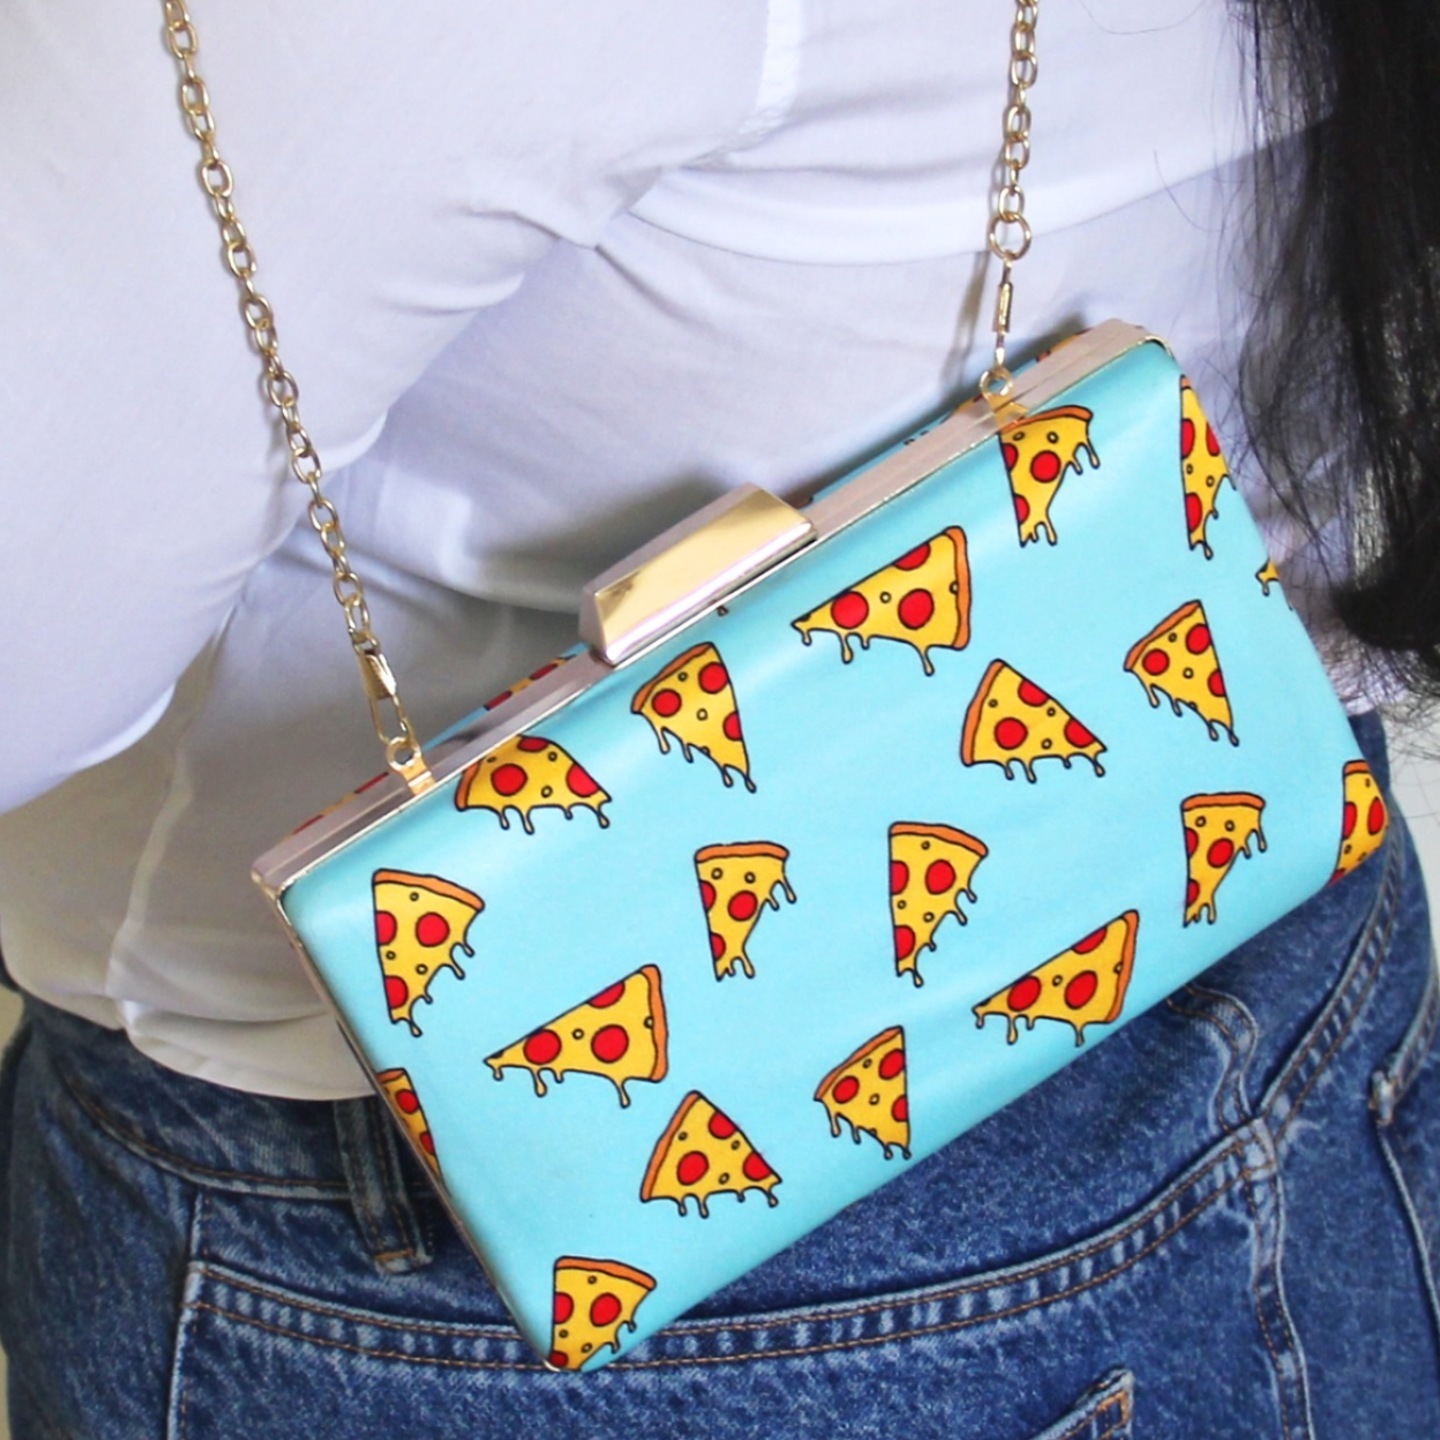 Quirky Pizza Printed Clutch Bag